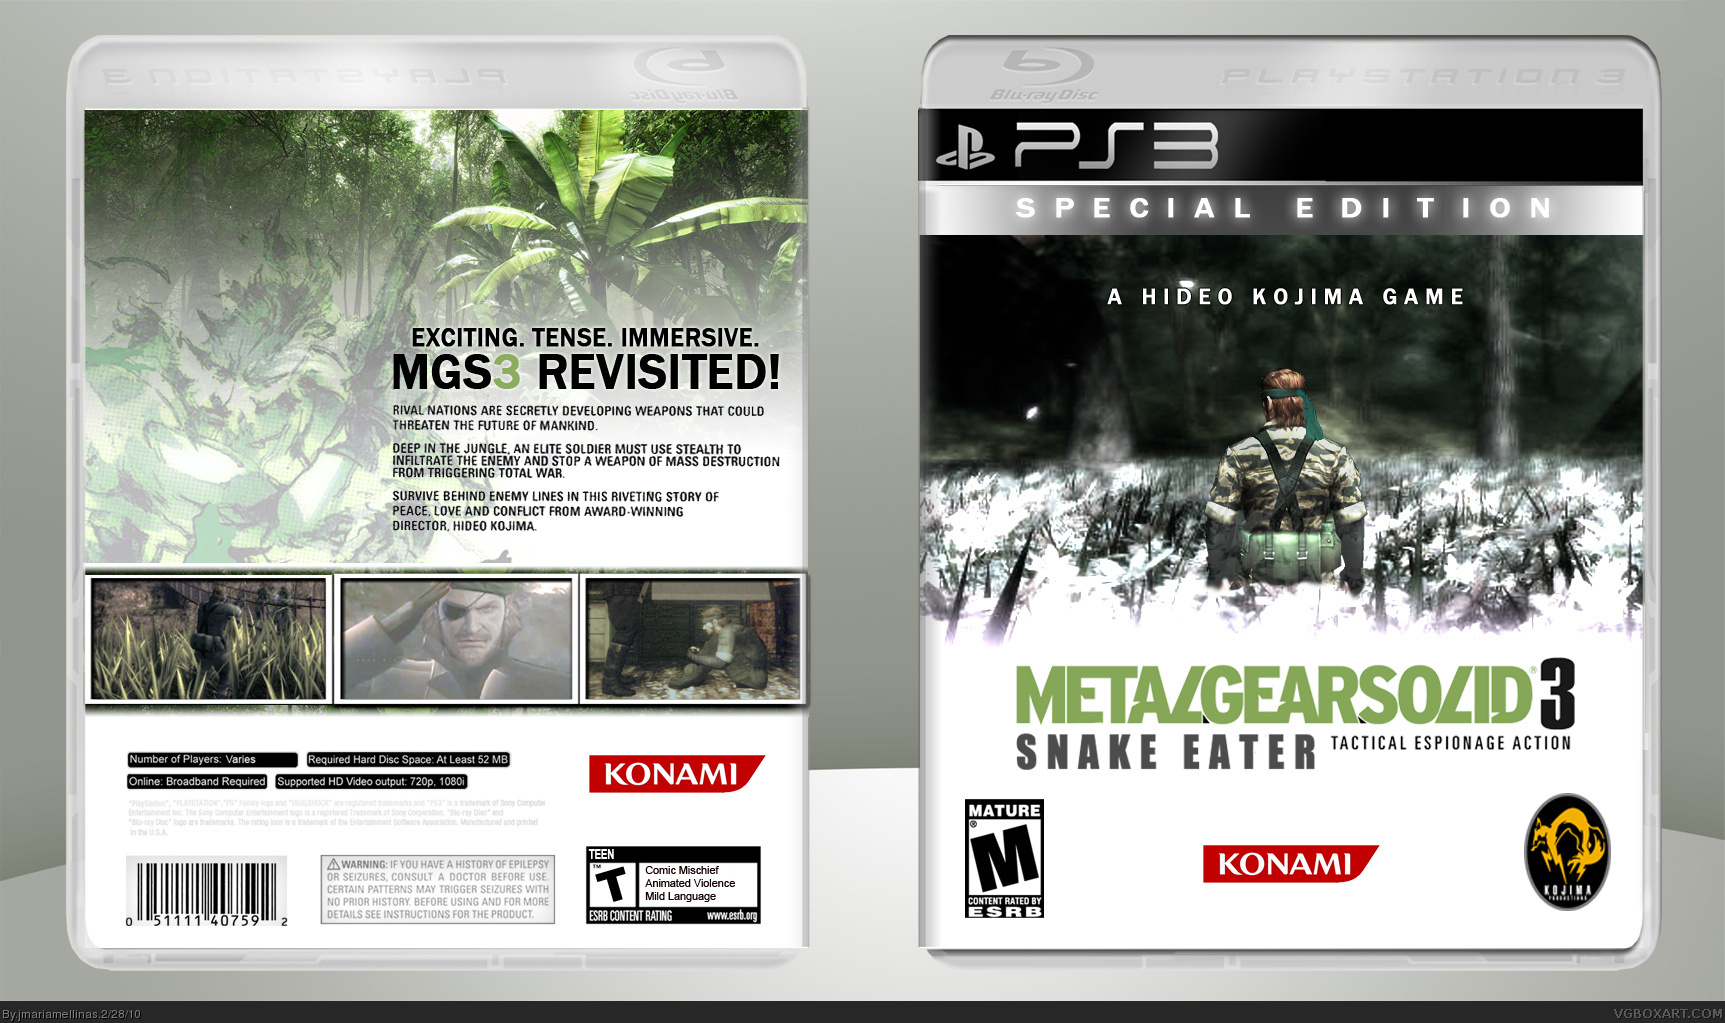 Metal Gear Solid 3: Snake Eater - Special Edition box cover